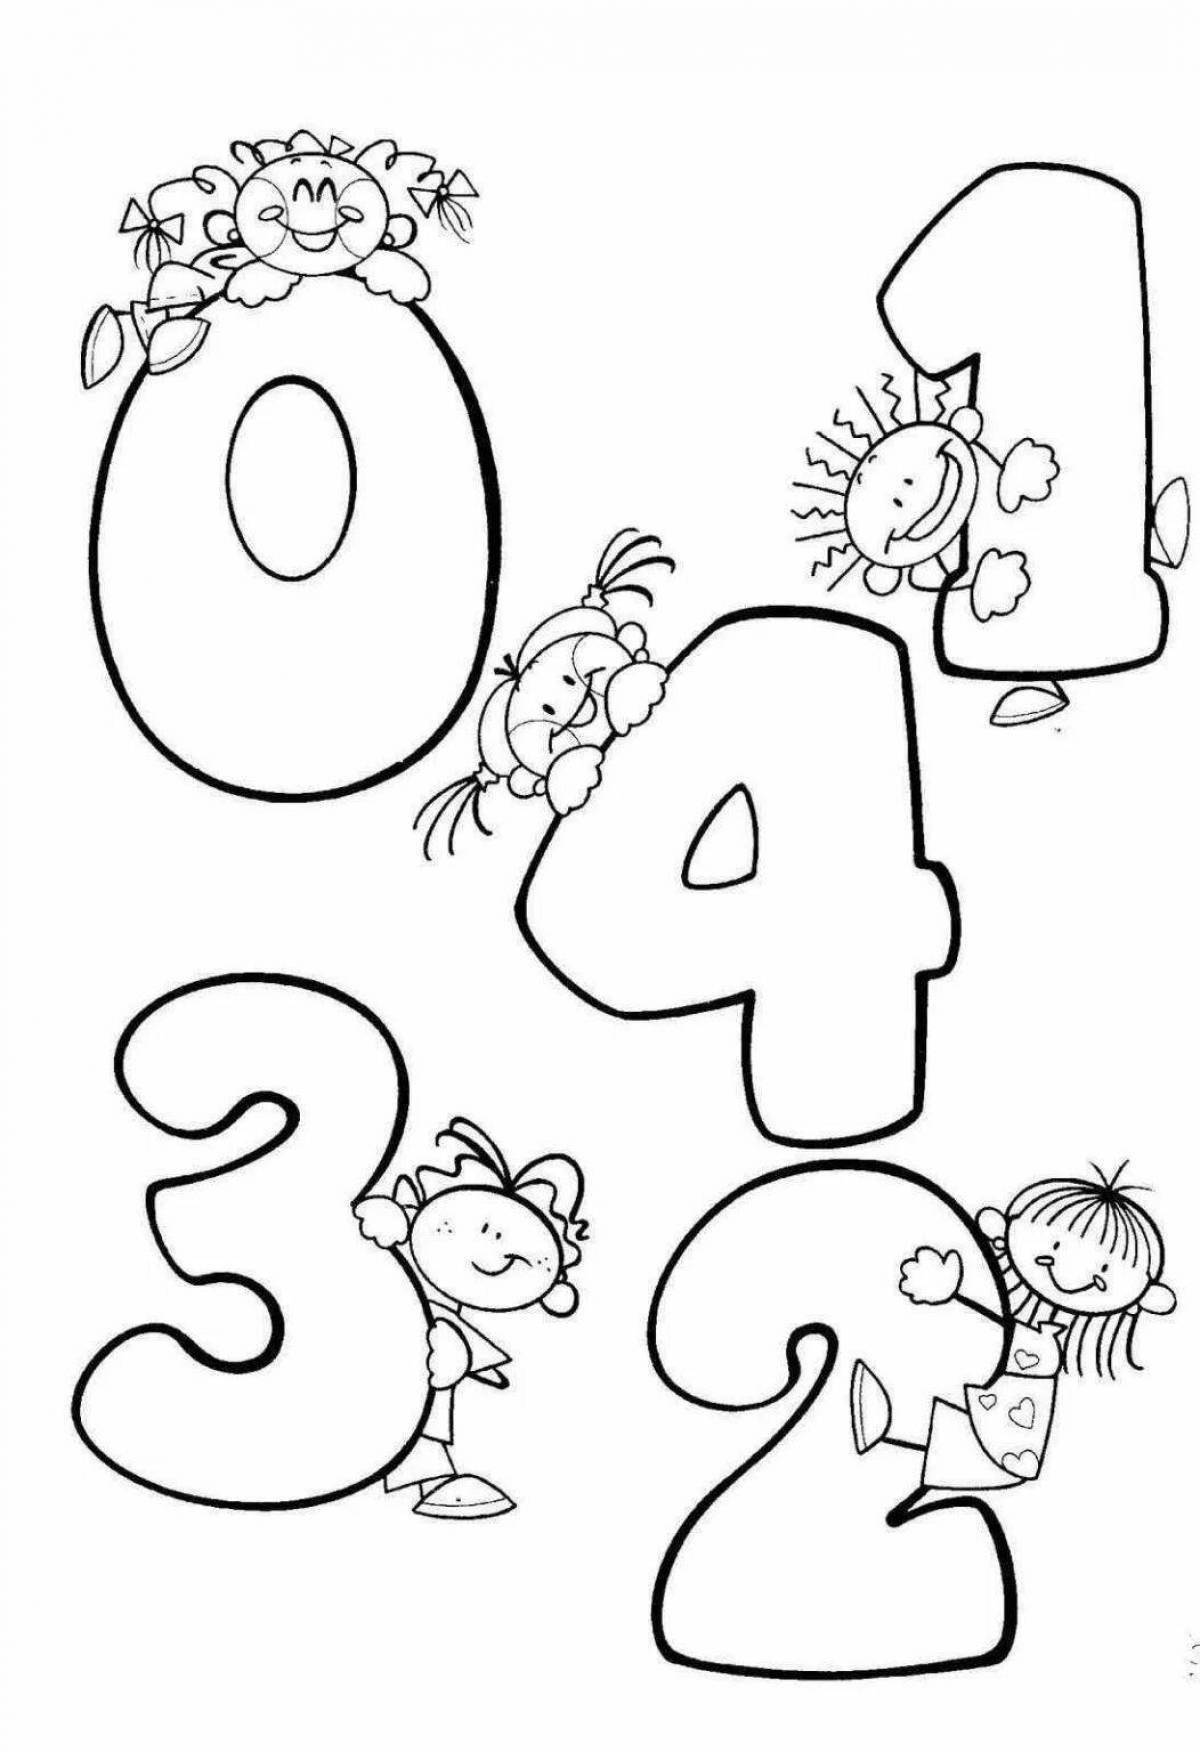 Coloring book shiny number 3